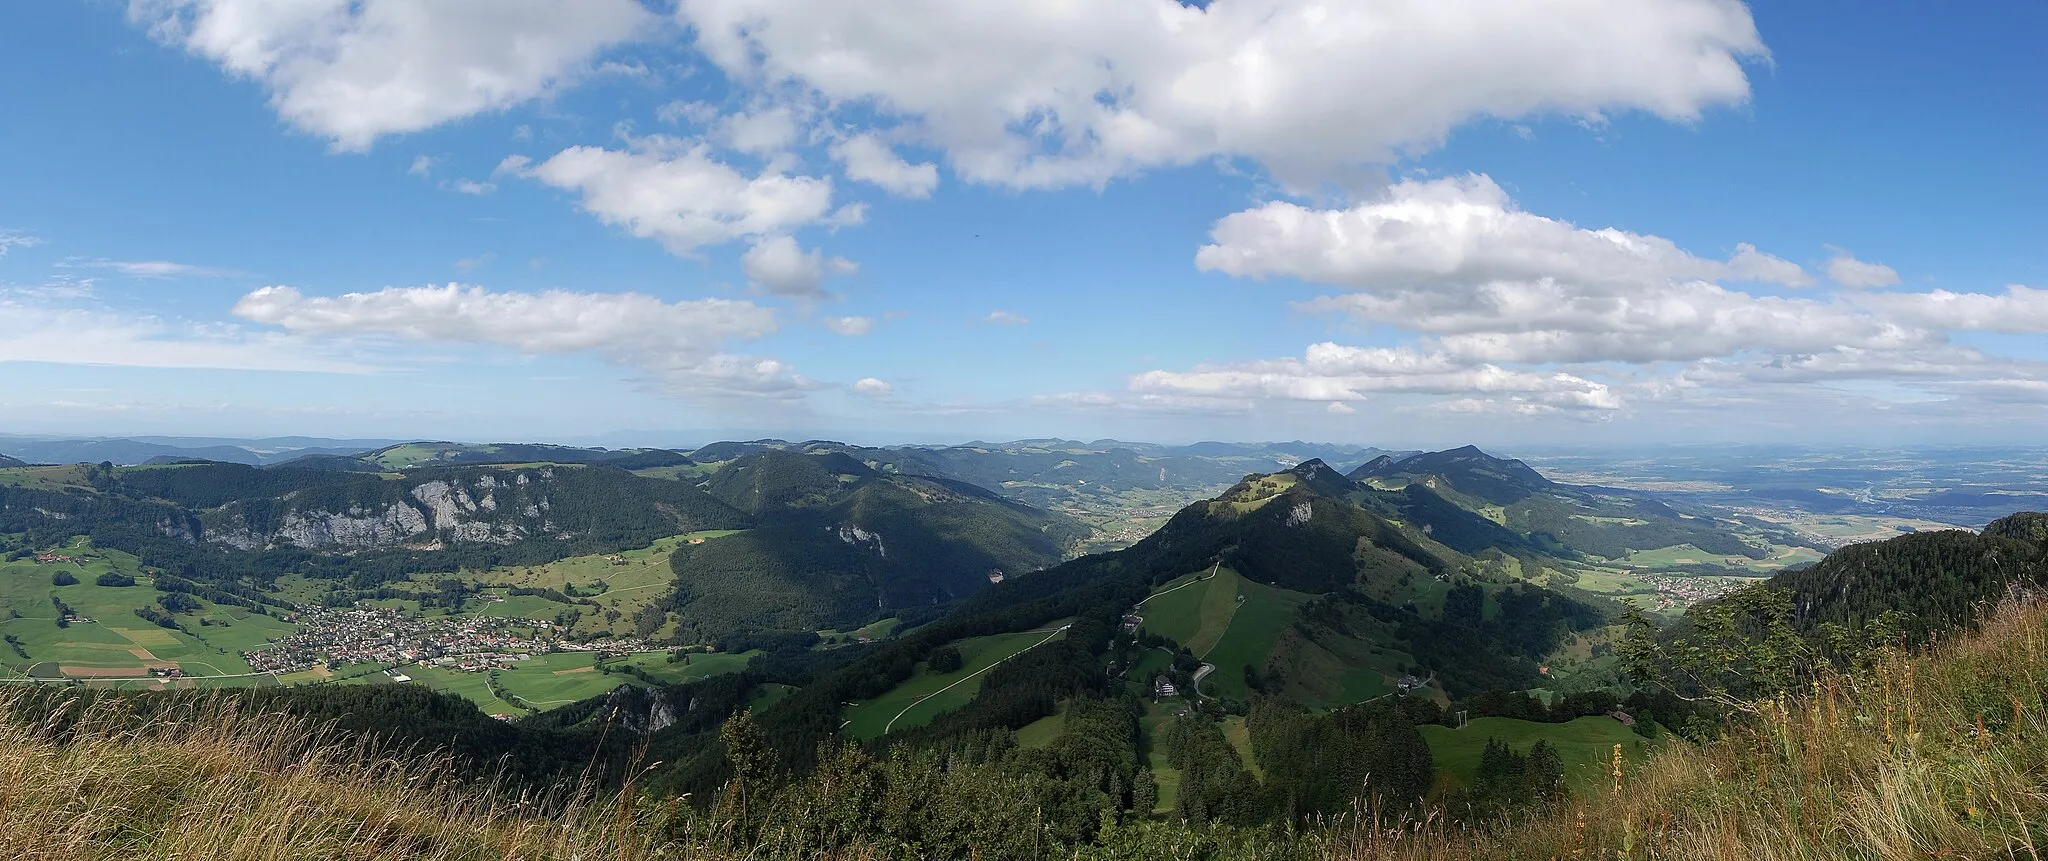 Photo showing: The picture, which is taken from the Röti (near Weissenstein), shows the Jura. On the left is the town Welschenrohr.